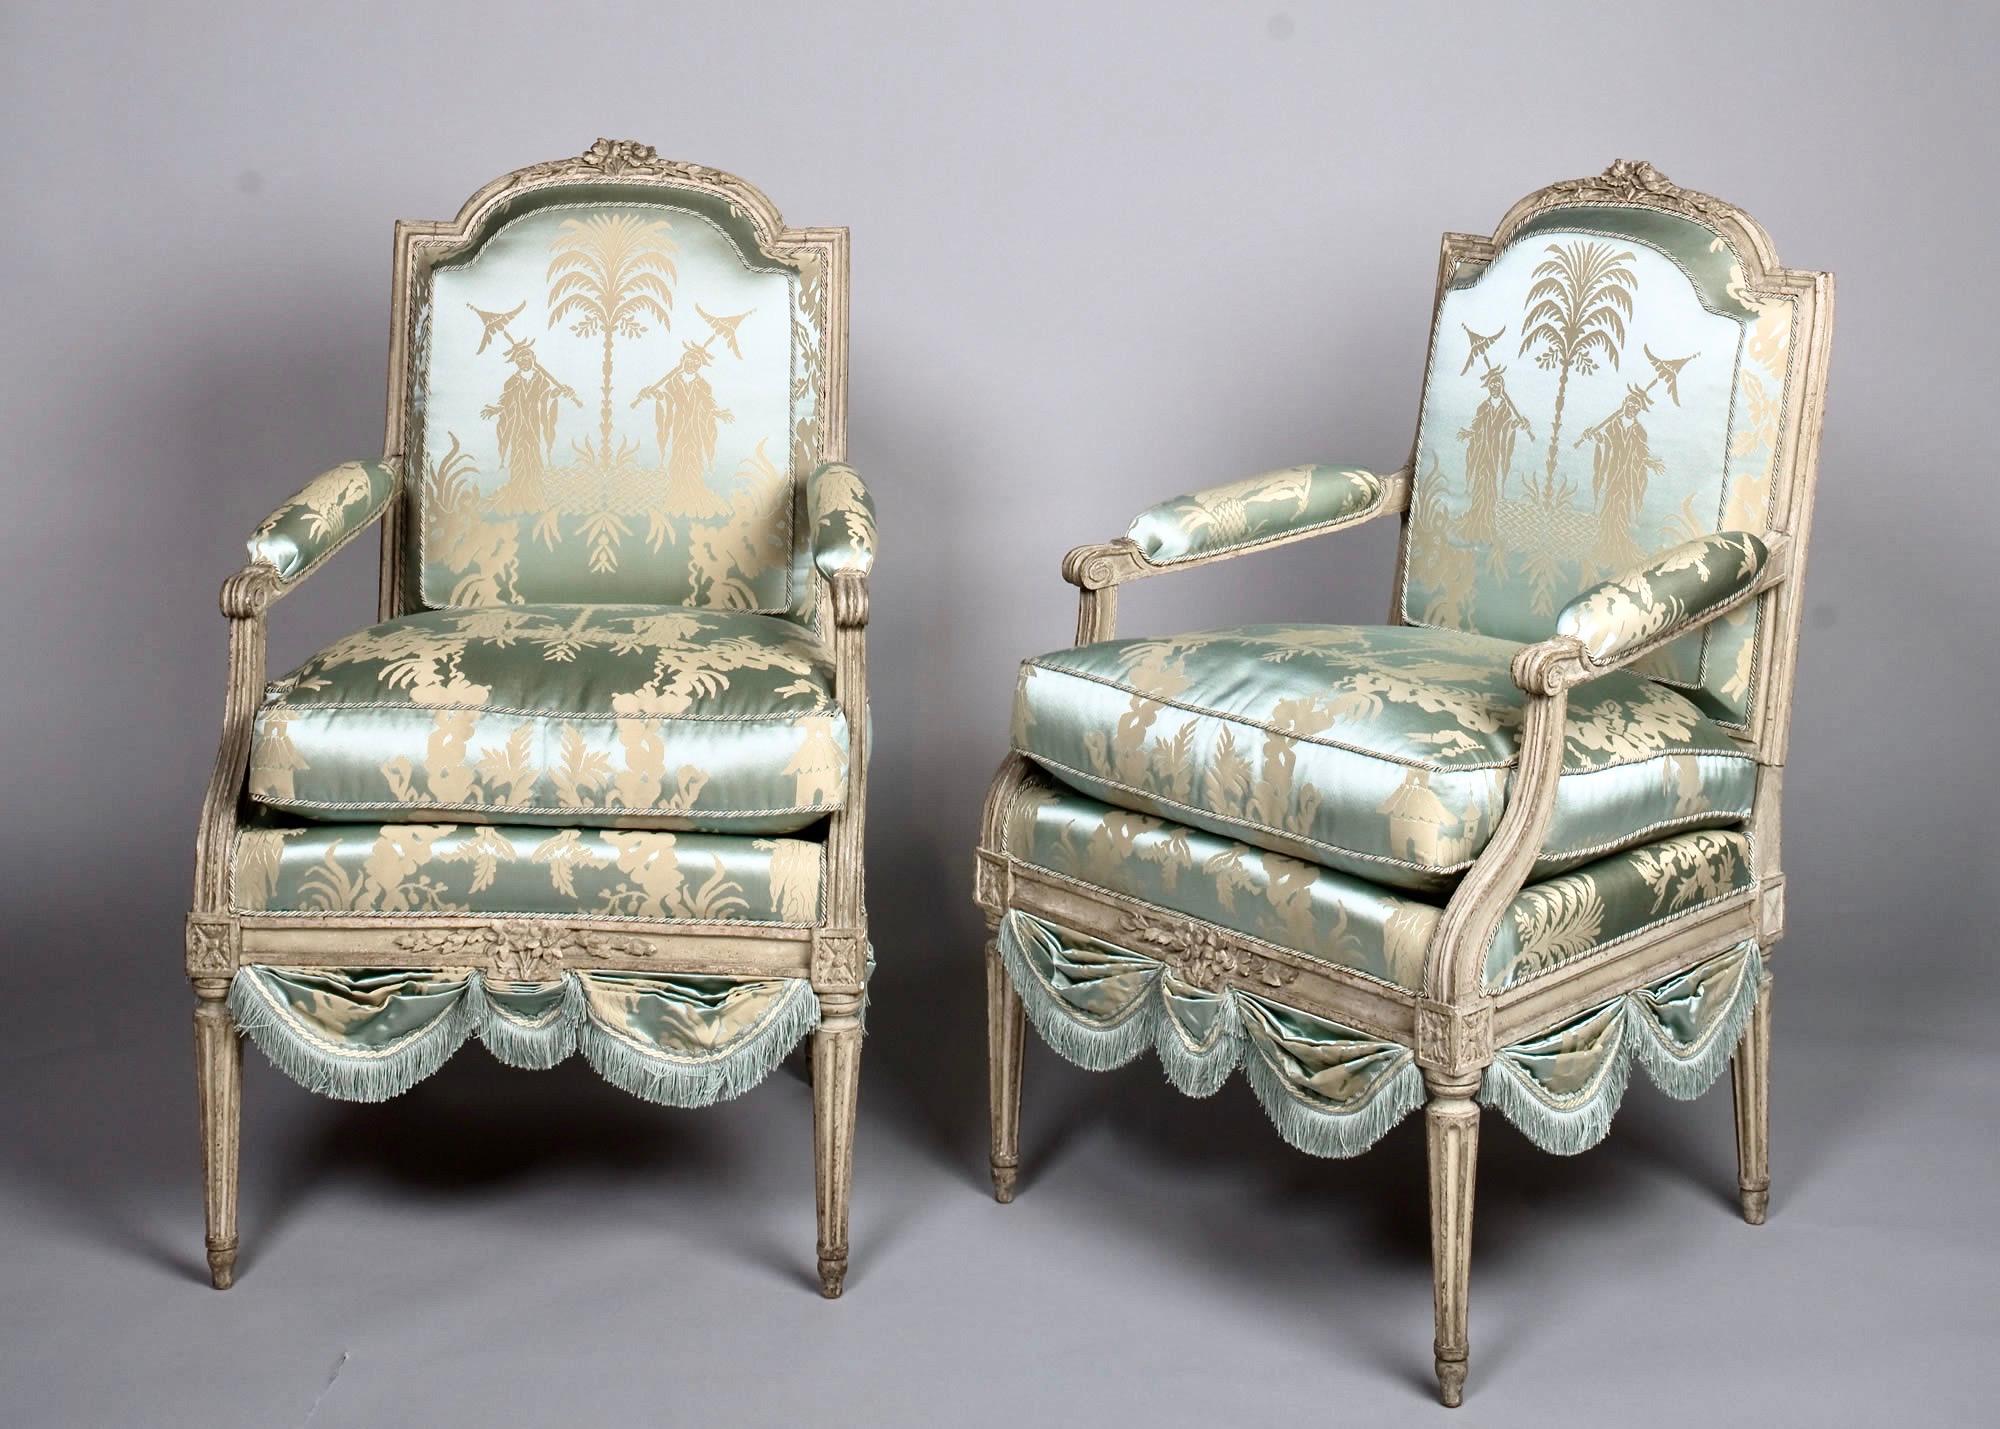 Louis XVI French silk armchair, Claude II Sené Fauteuil a la Reine, early 1780s. Arched, padded back with stylized flowerhead hand carved topsail, similarly poetic hand carved seat rail. Raised on gracefully tapering, fluted legs. Reupholstered in